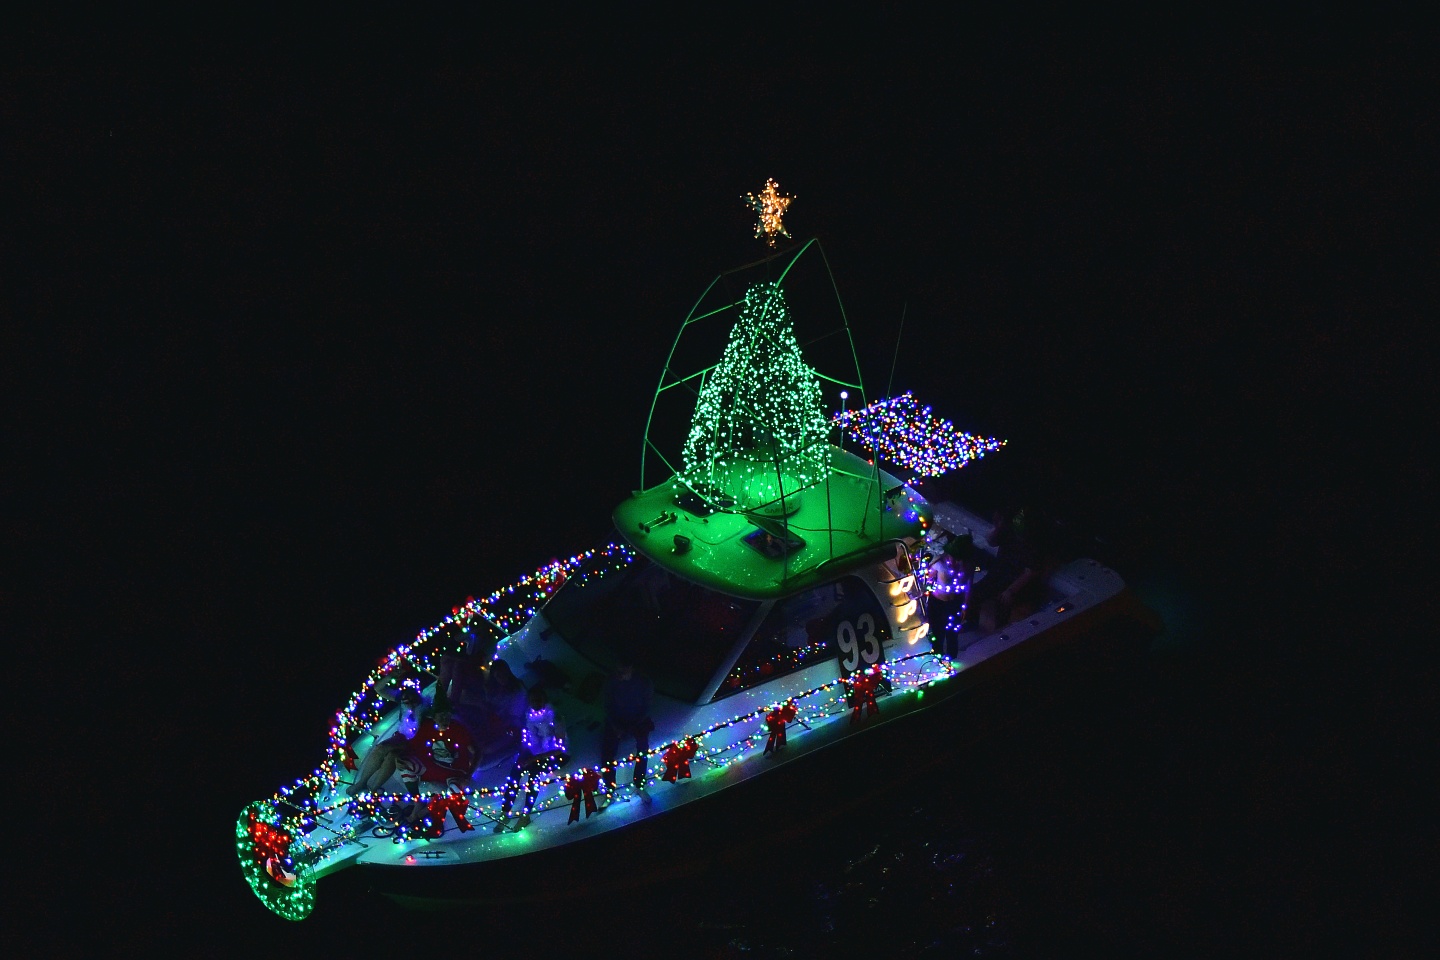 Perfect Life, boat number 93 in the 2021 Winterfest Boat Parade